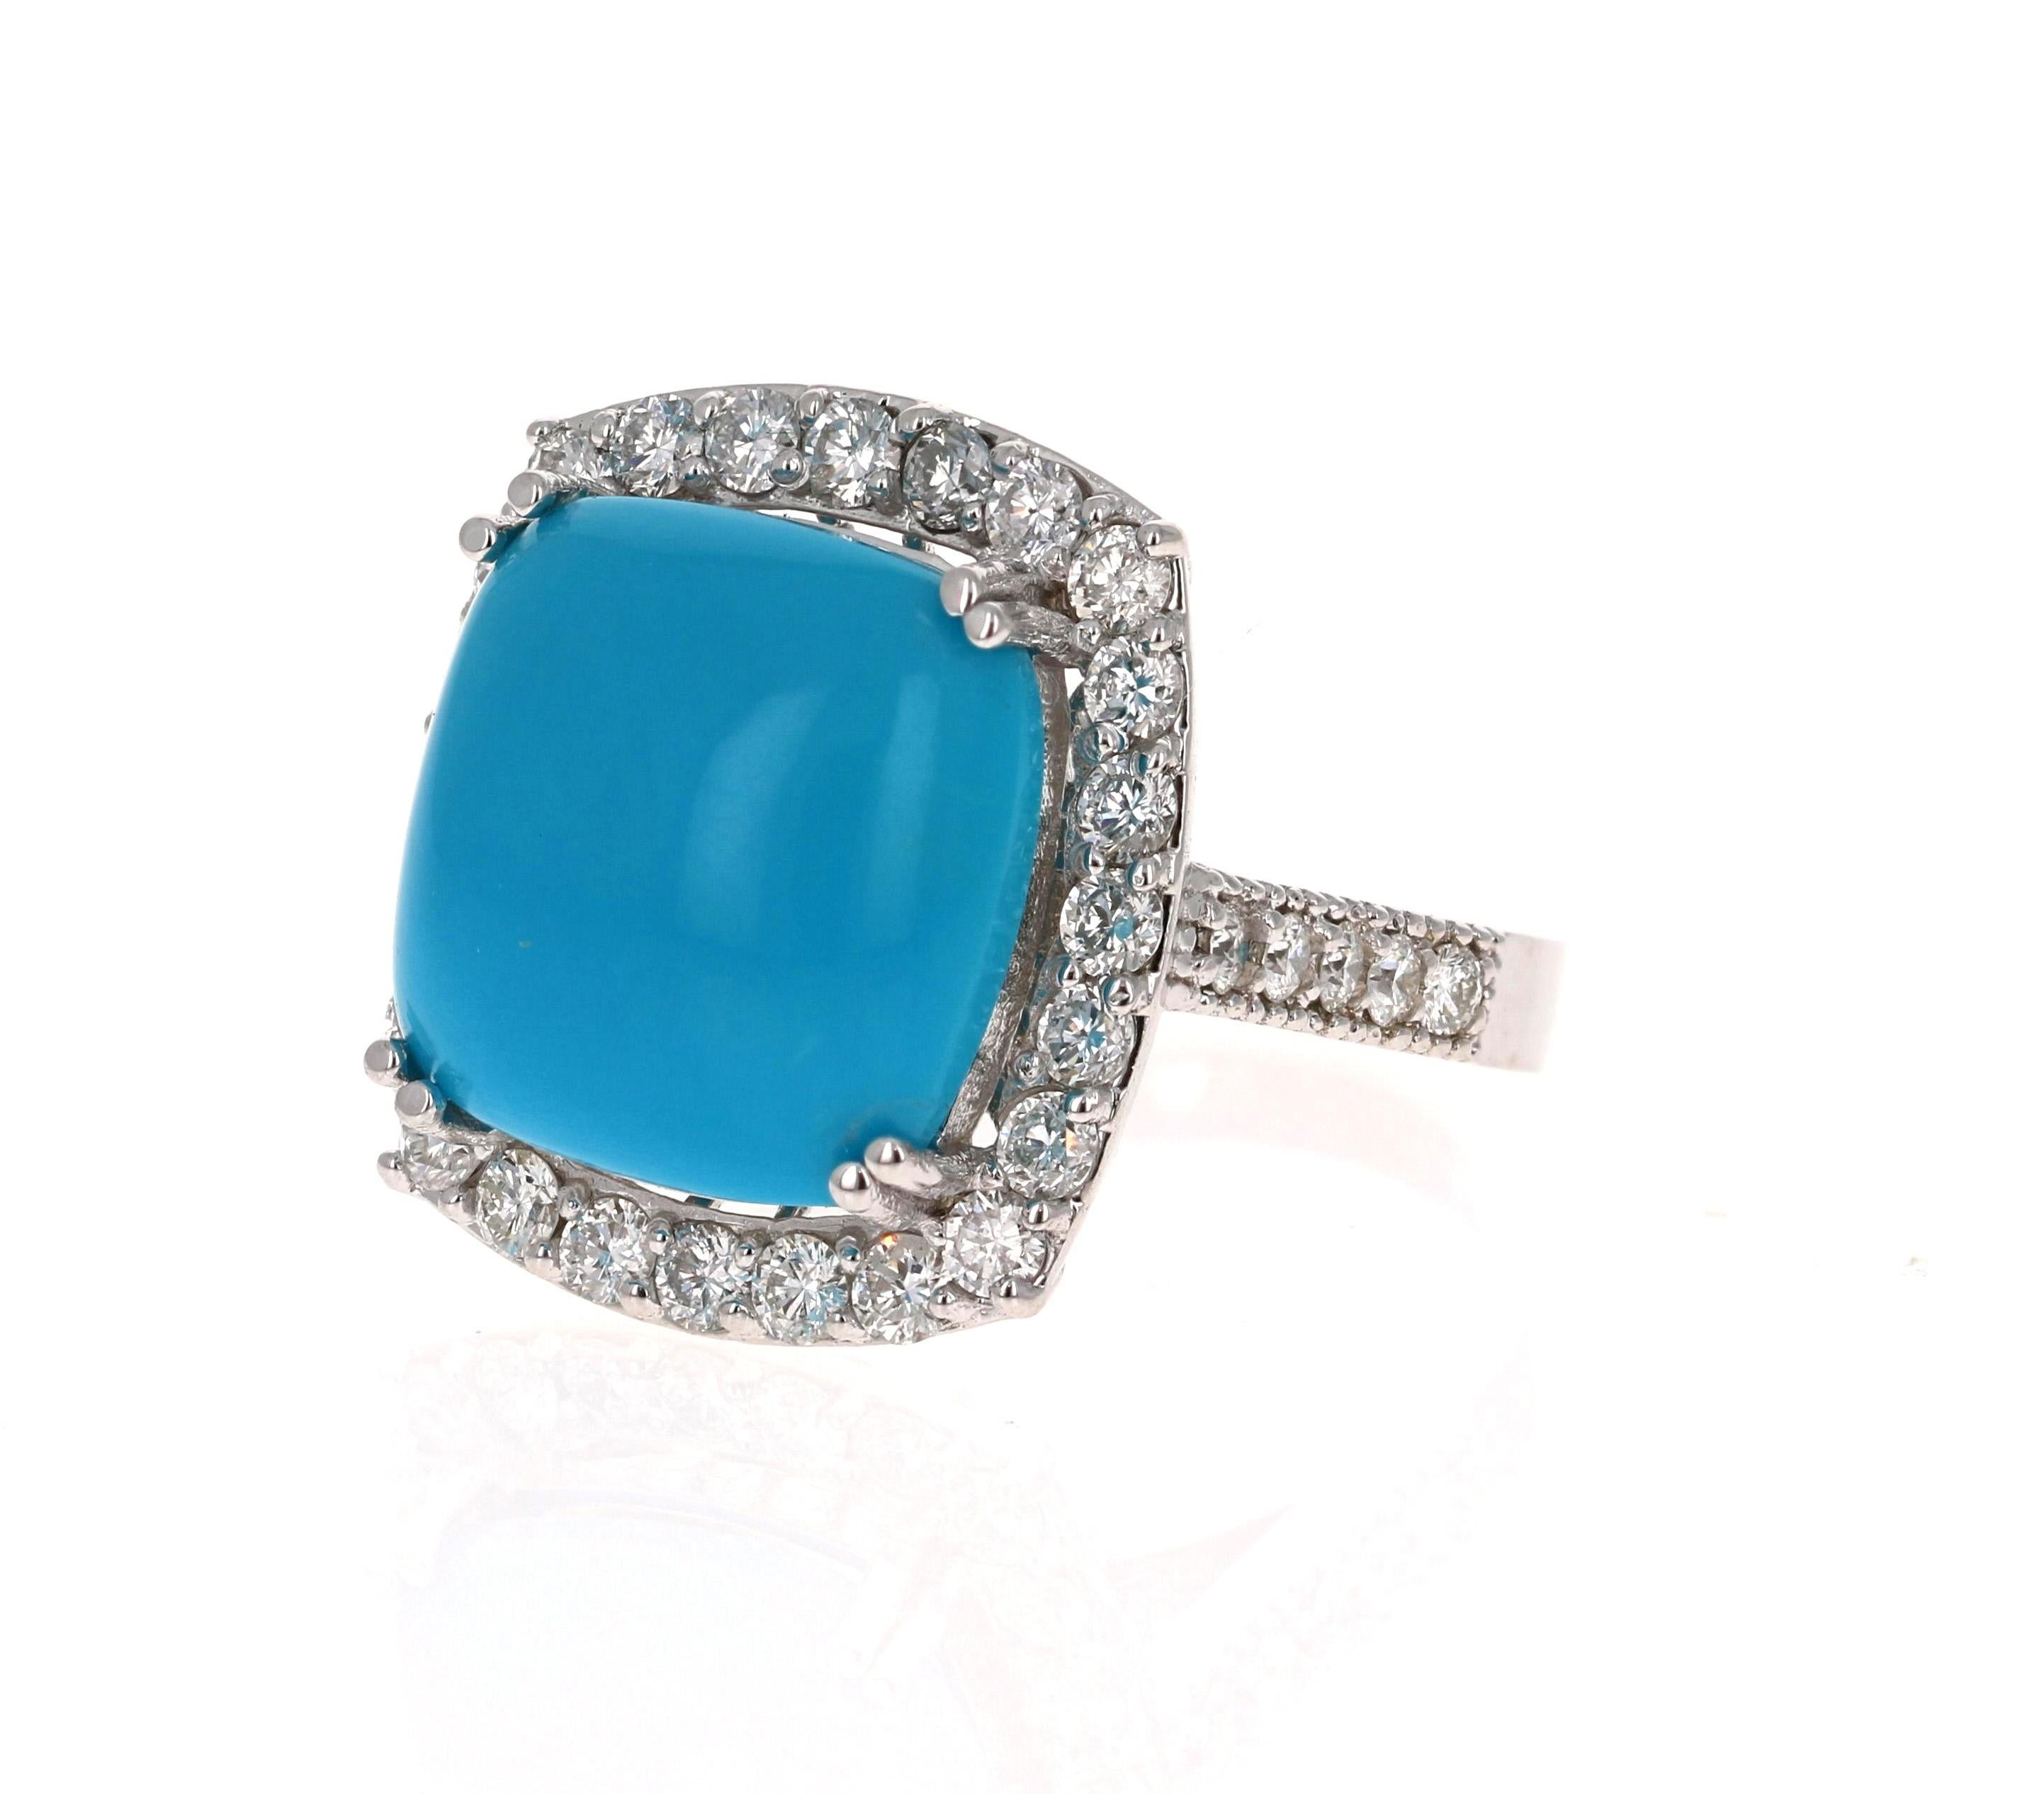 This is an exceptional and unique beauty! 

The Cushion Cut Turquoise is 10.56 Carats and is surrounded by a row of beautifully set diamonds. There are 34 Round Cut Diamonds that weigh 1.36 Carats (Clarity: SI2, Color: F). The total carat weight of